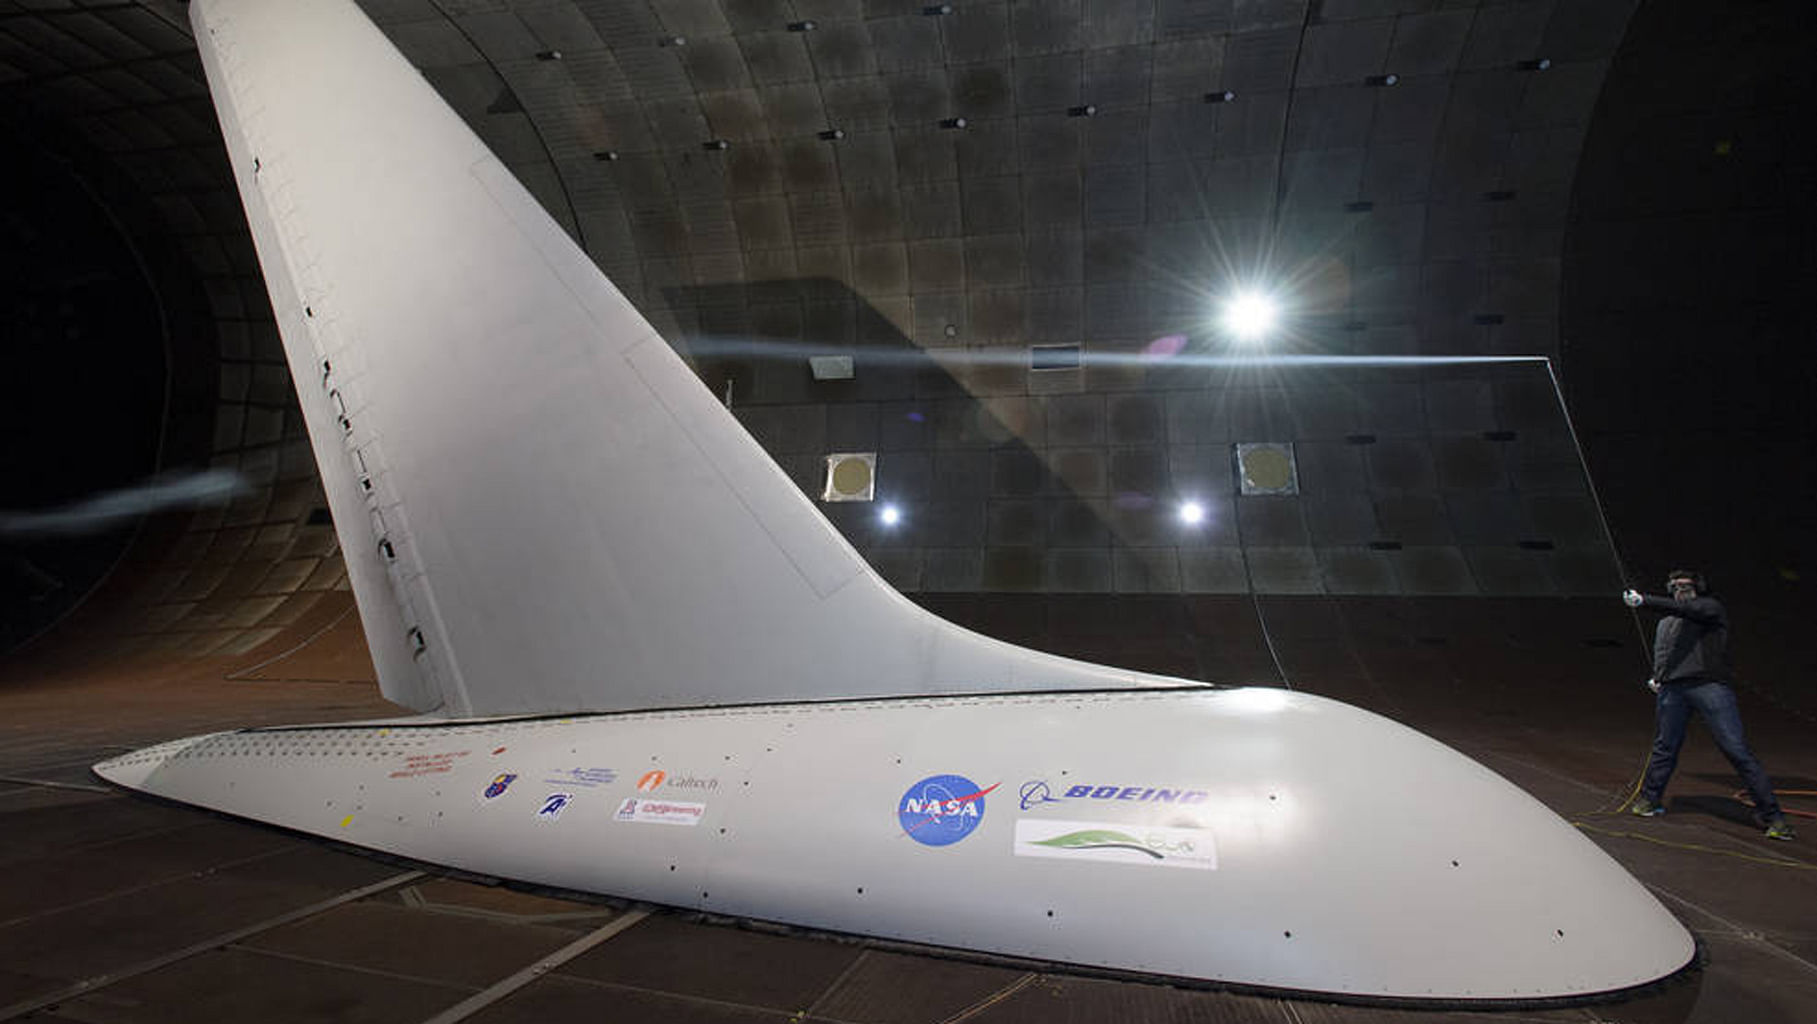 Researchers with NASA’s ERA project said that it might someday be possible to design smaller vertical tails that would reduce drag and save fuel. (Photo: NASA)